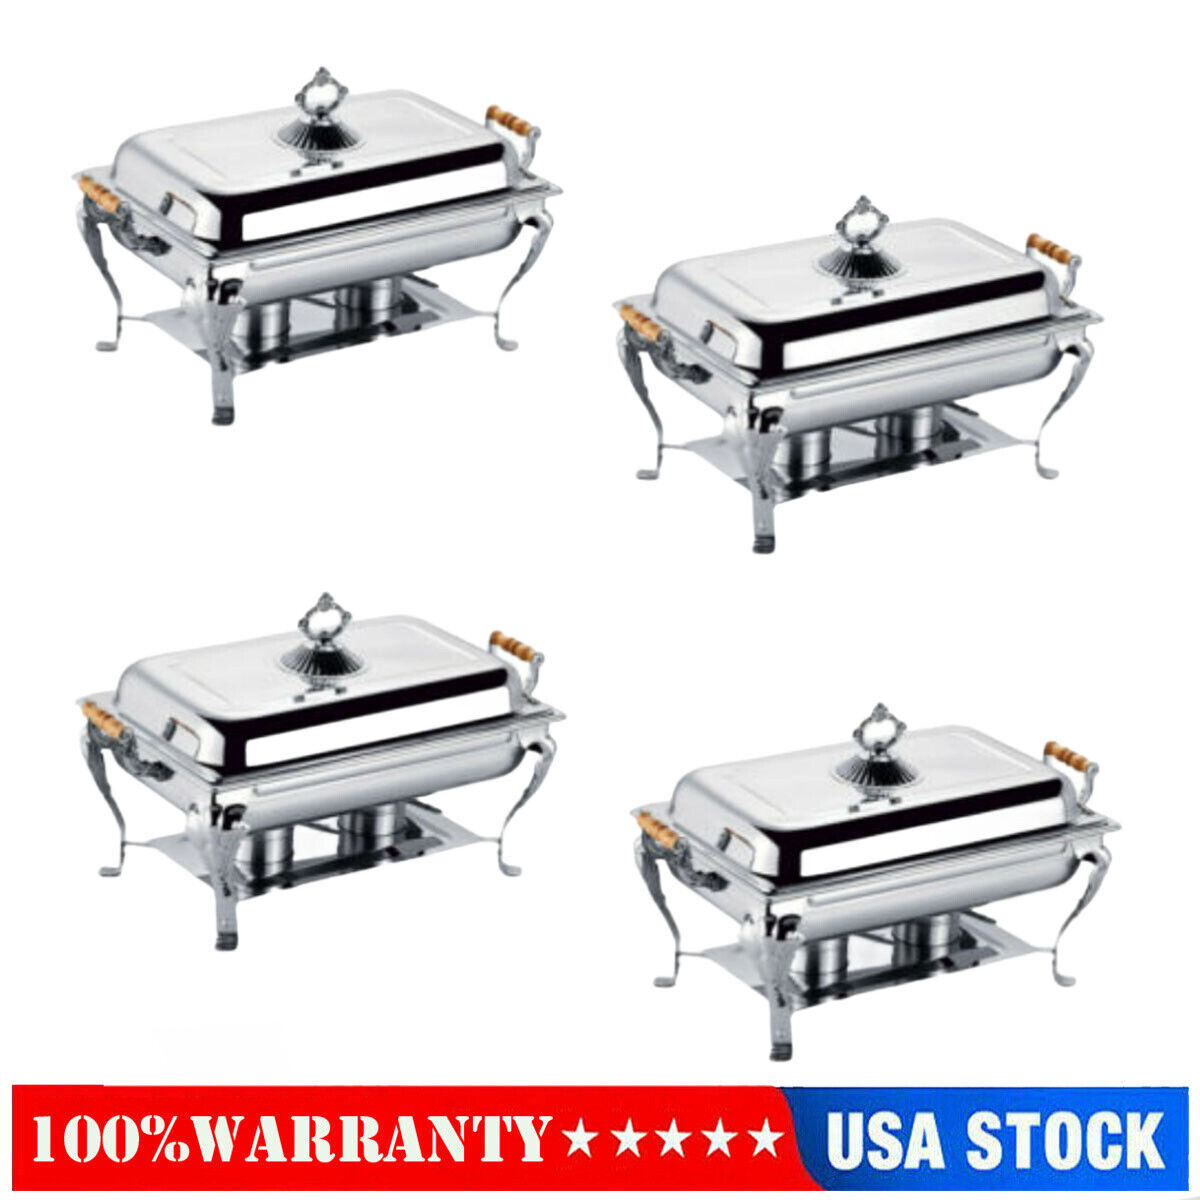 4 Pack Catering Stainless Steel Chafer Chafing Dish Sets 8 QT Full Size Buffet